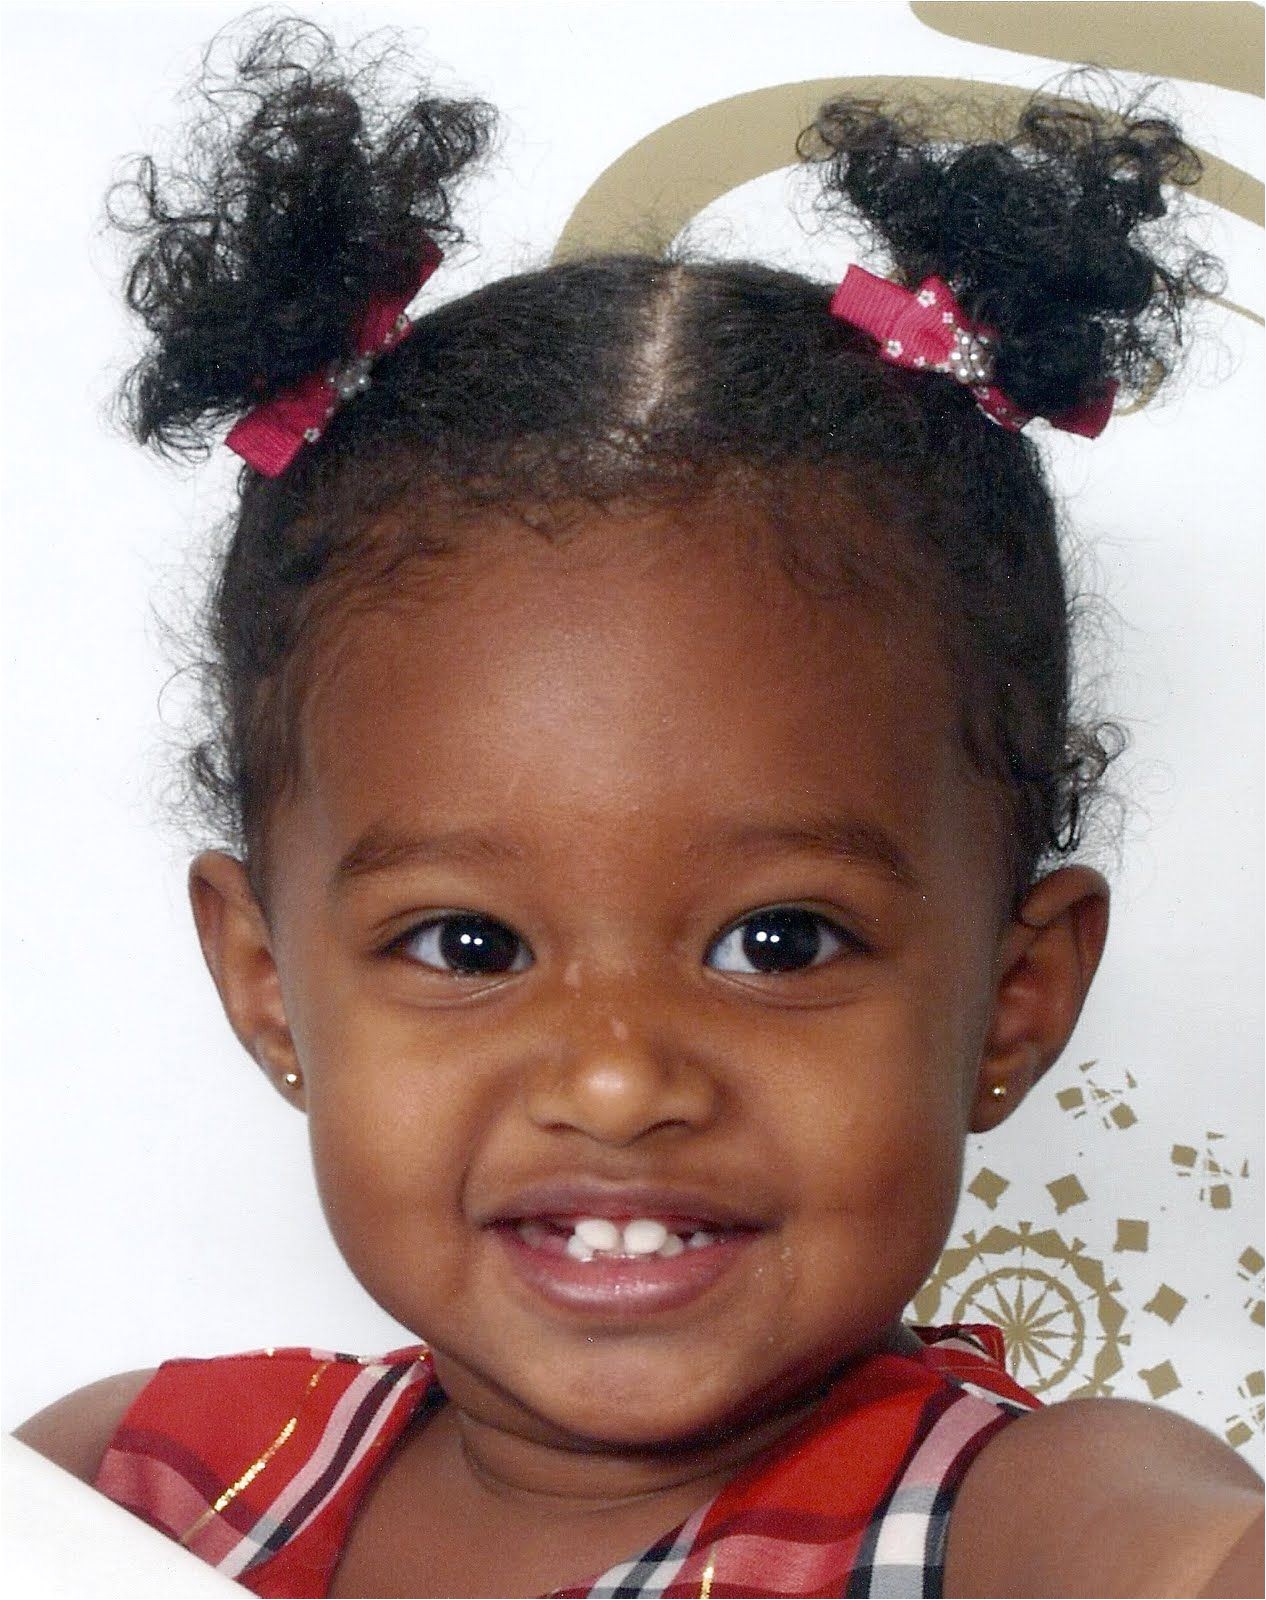 1 Year Old Black Baby Girl Hairstyles All American Parents Magazine includes parenting tips for all parents raising black children